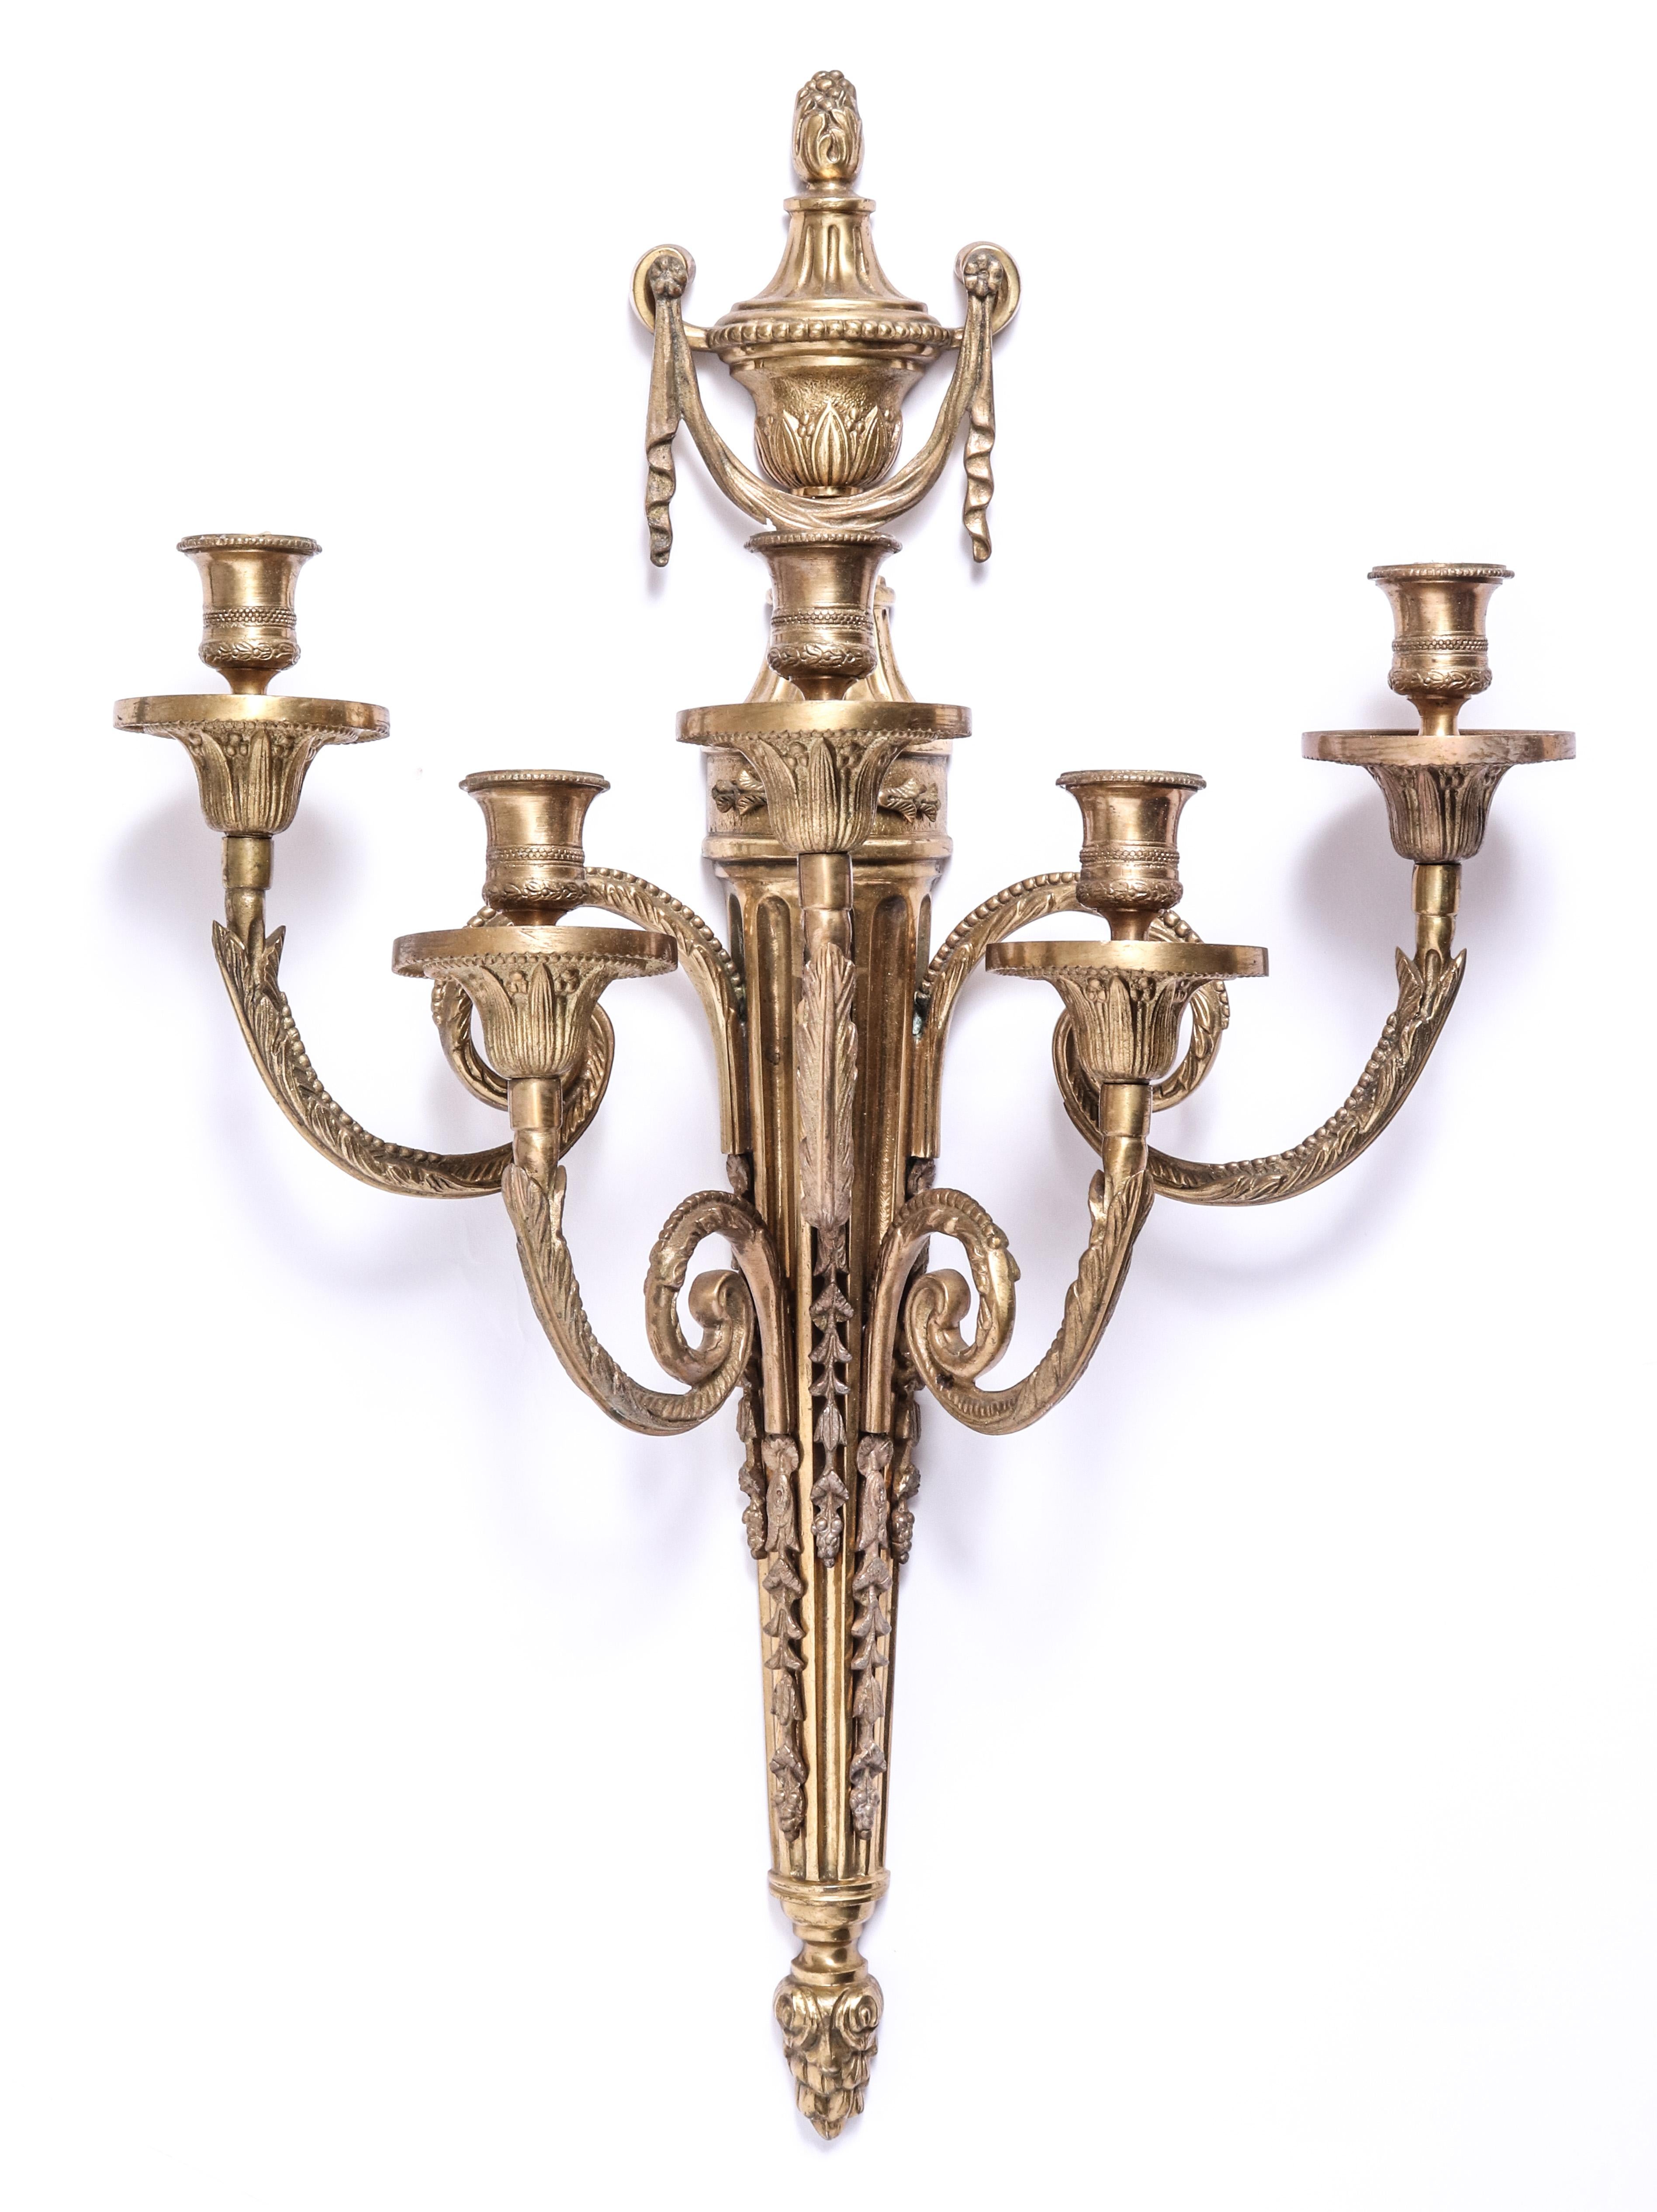 Neoclassical Revival Italian Neoclassical Style Gilt Bronze Sconces